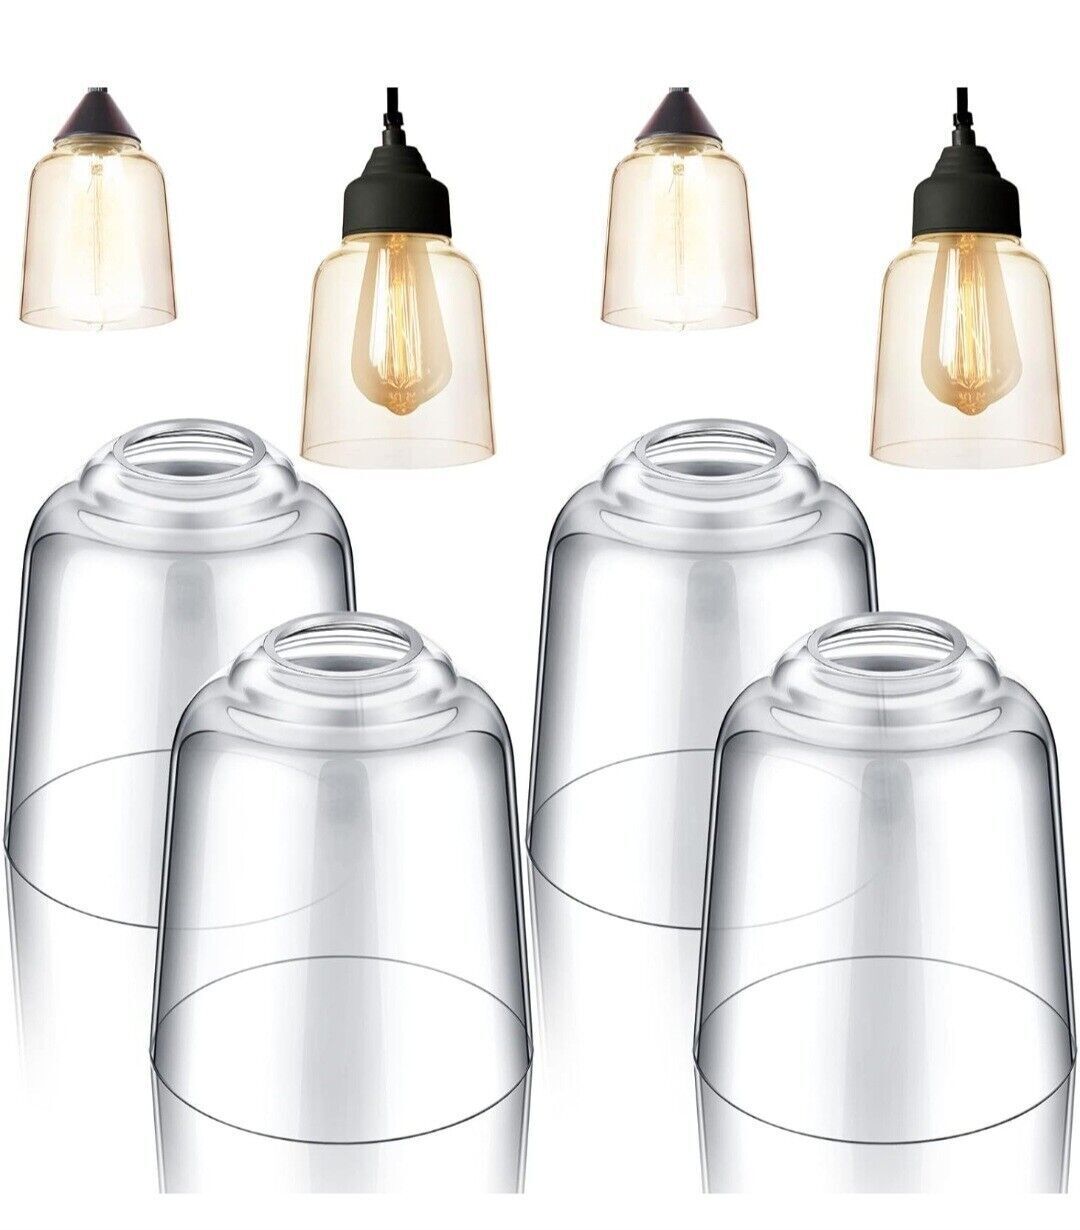 4 Clear Glass Shades 5 Inch Diameter, 1.65 Inch for E26, Bell Shaped